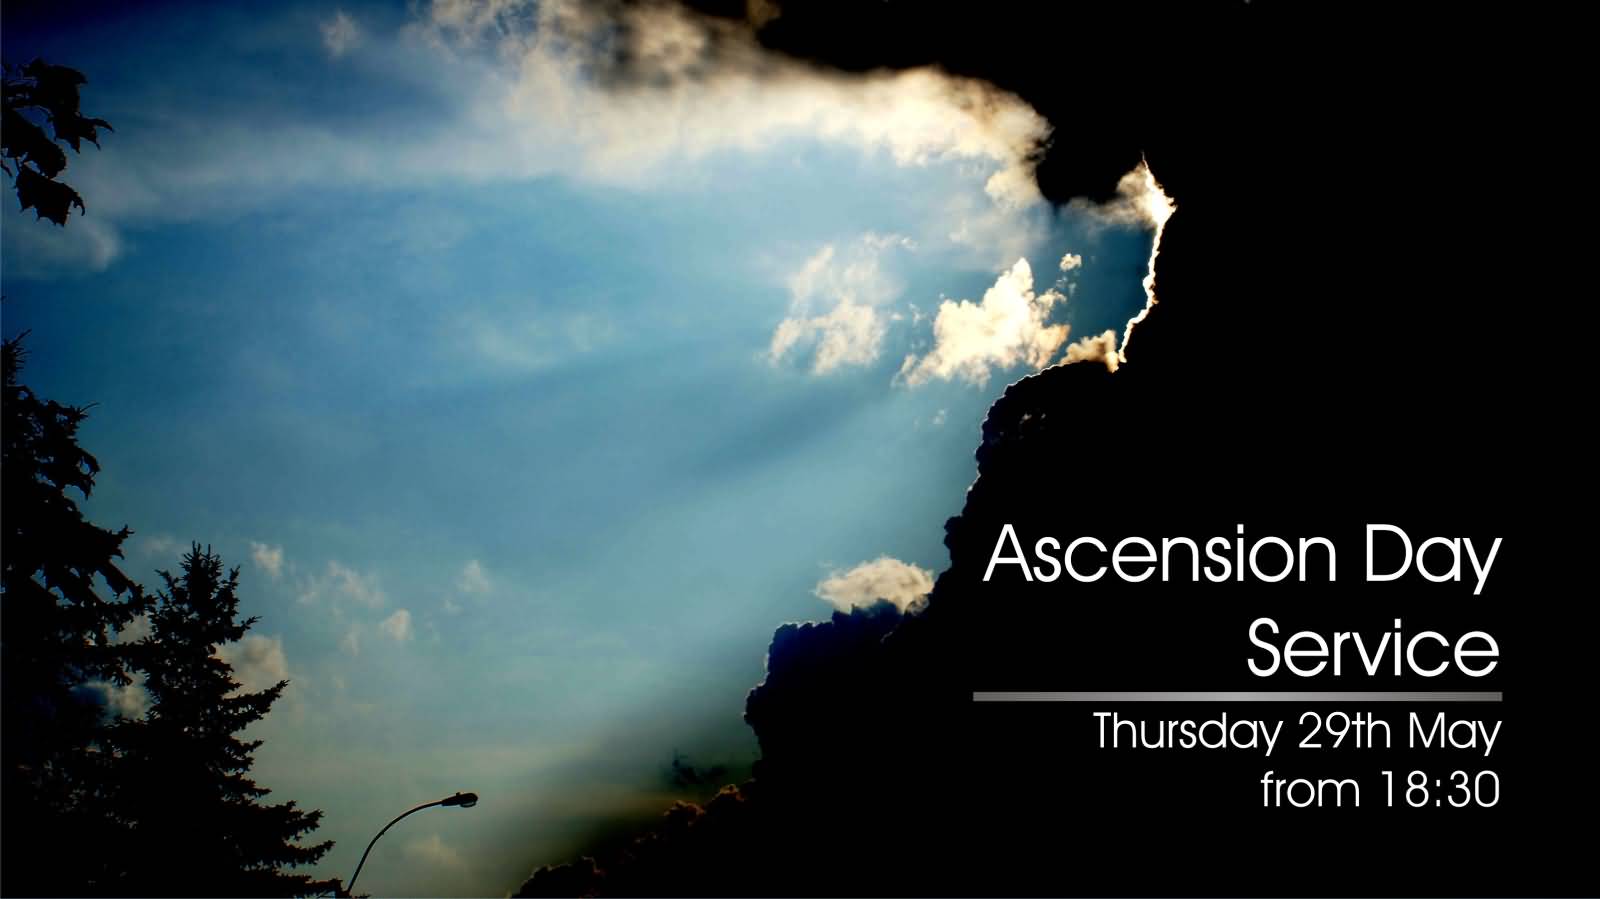 Ascension Day Service 29th May